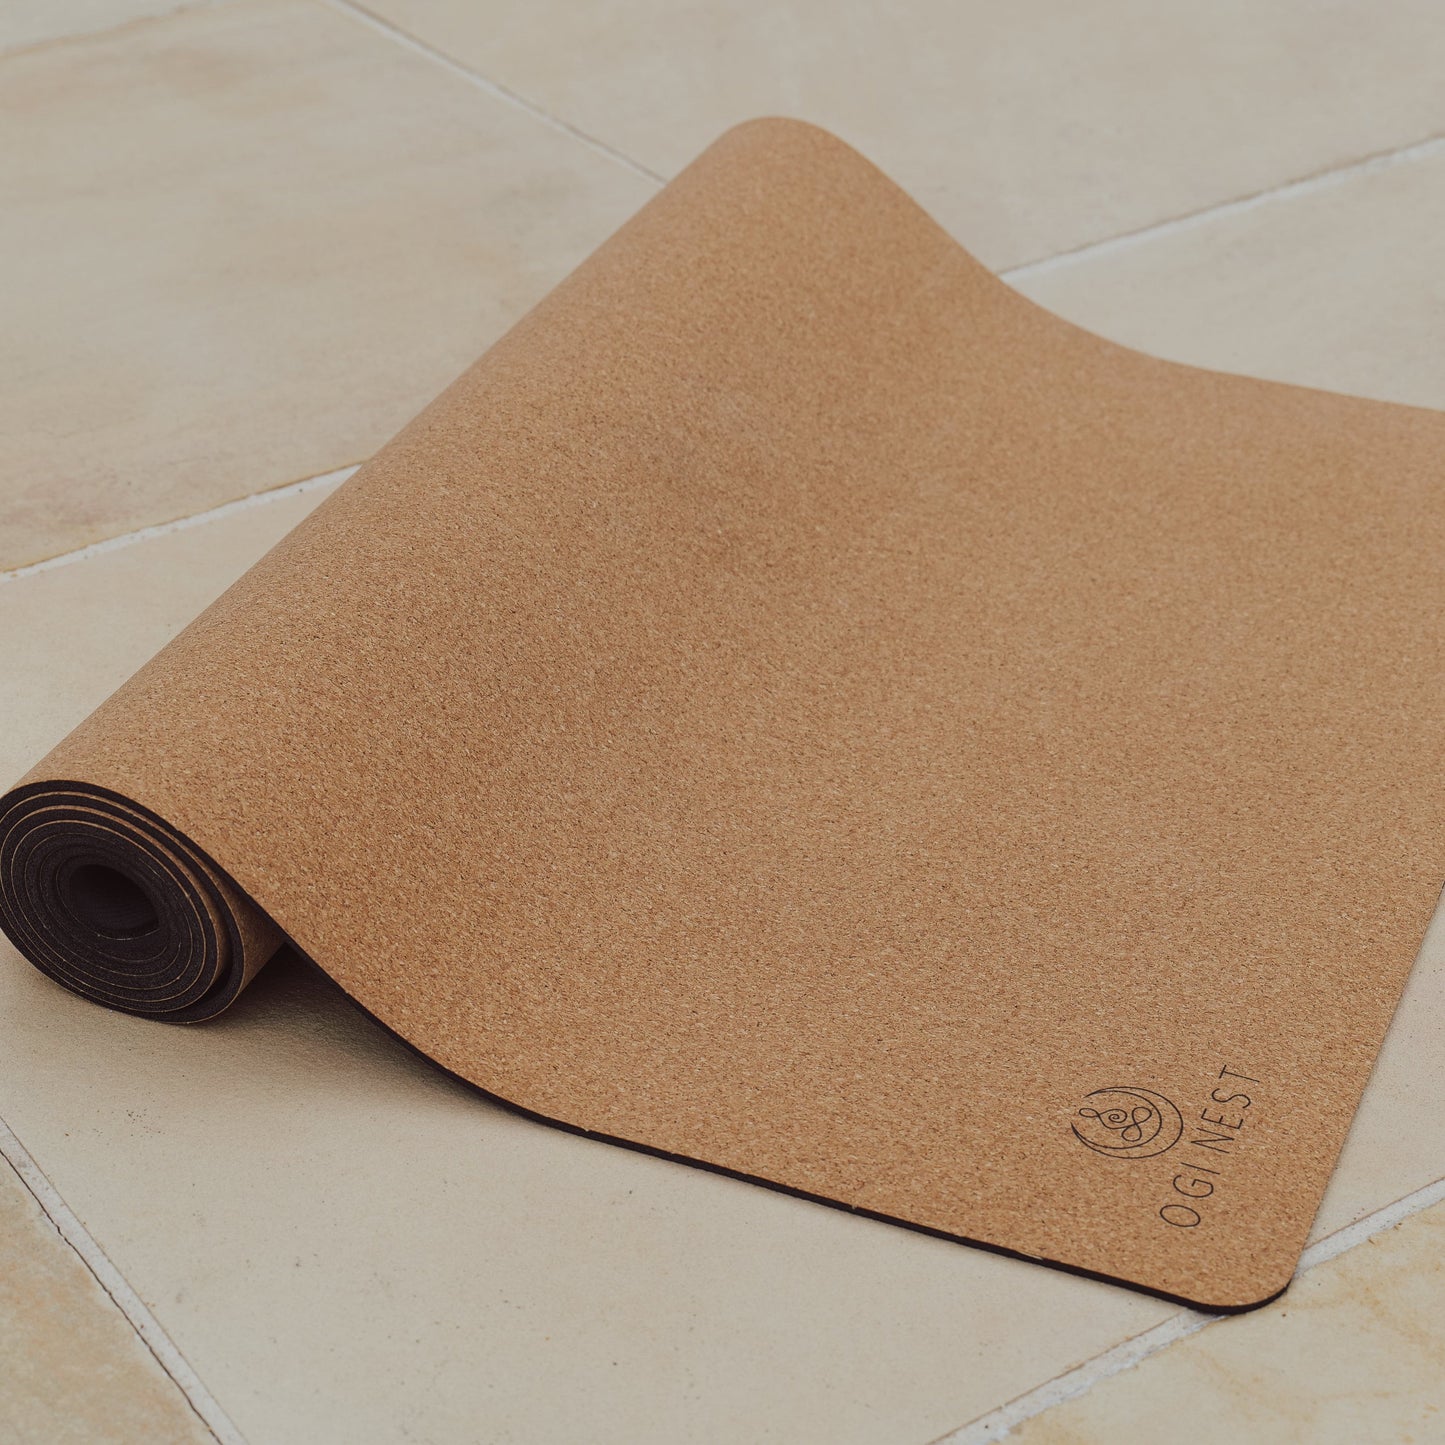 Elephant cork and natural rubber yoga mat partially rolled up.